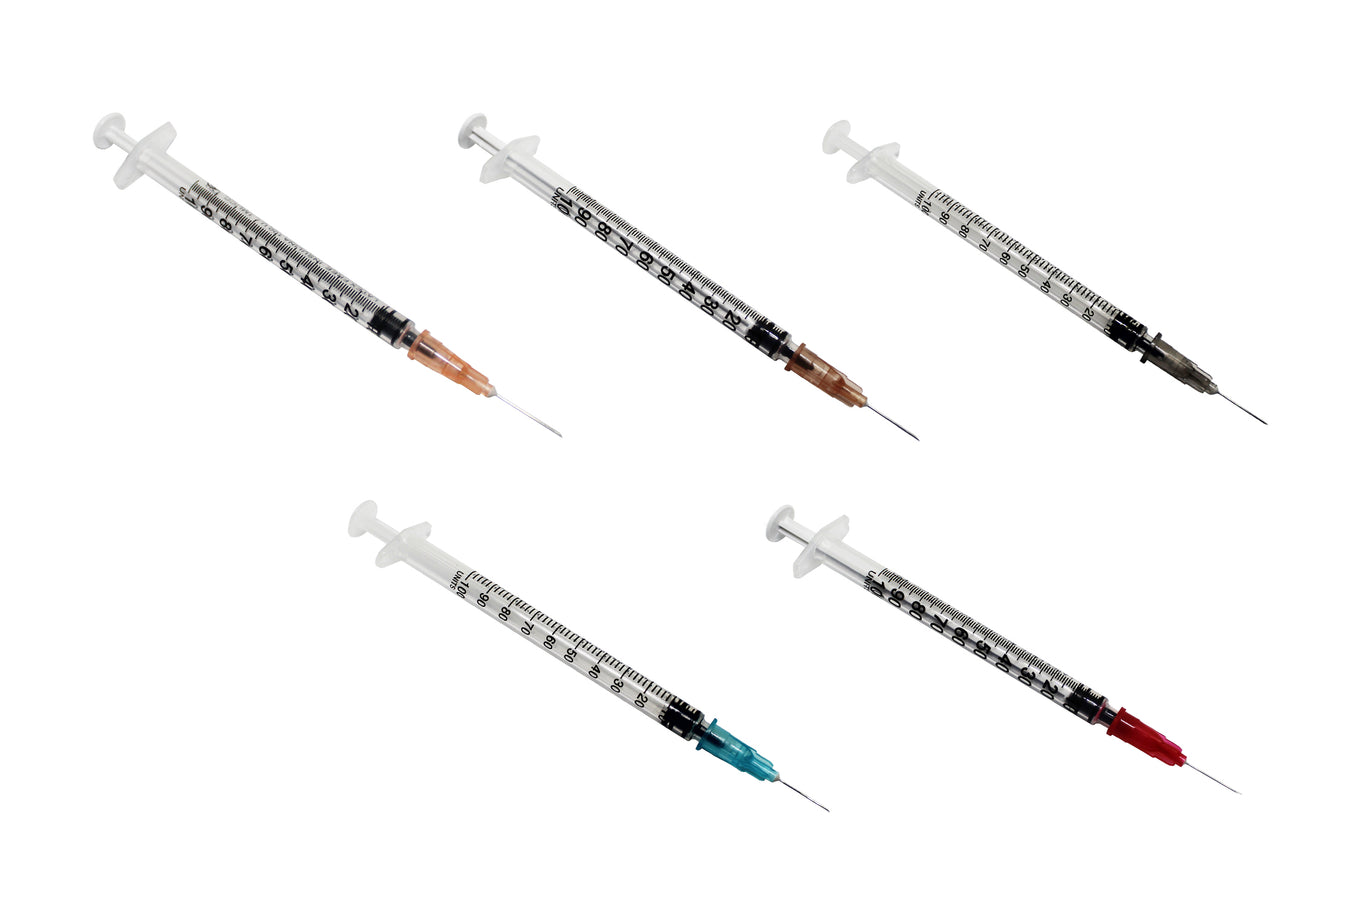 1ml syringe & needle collection for sale in the UK. 25G x 16mm, 26g x 13mm, 27g x 13mm, 28g x 13mm, 29g x 13mm